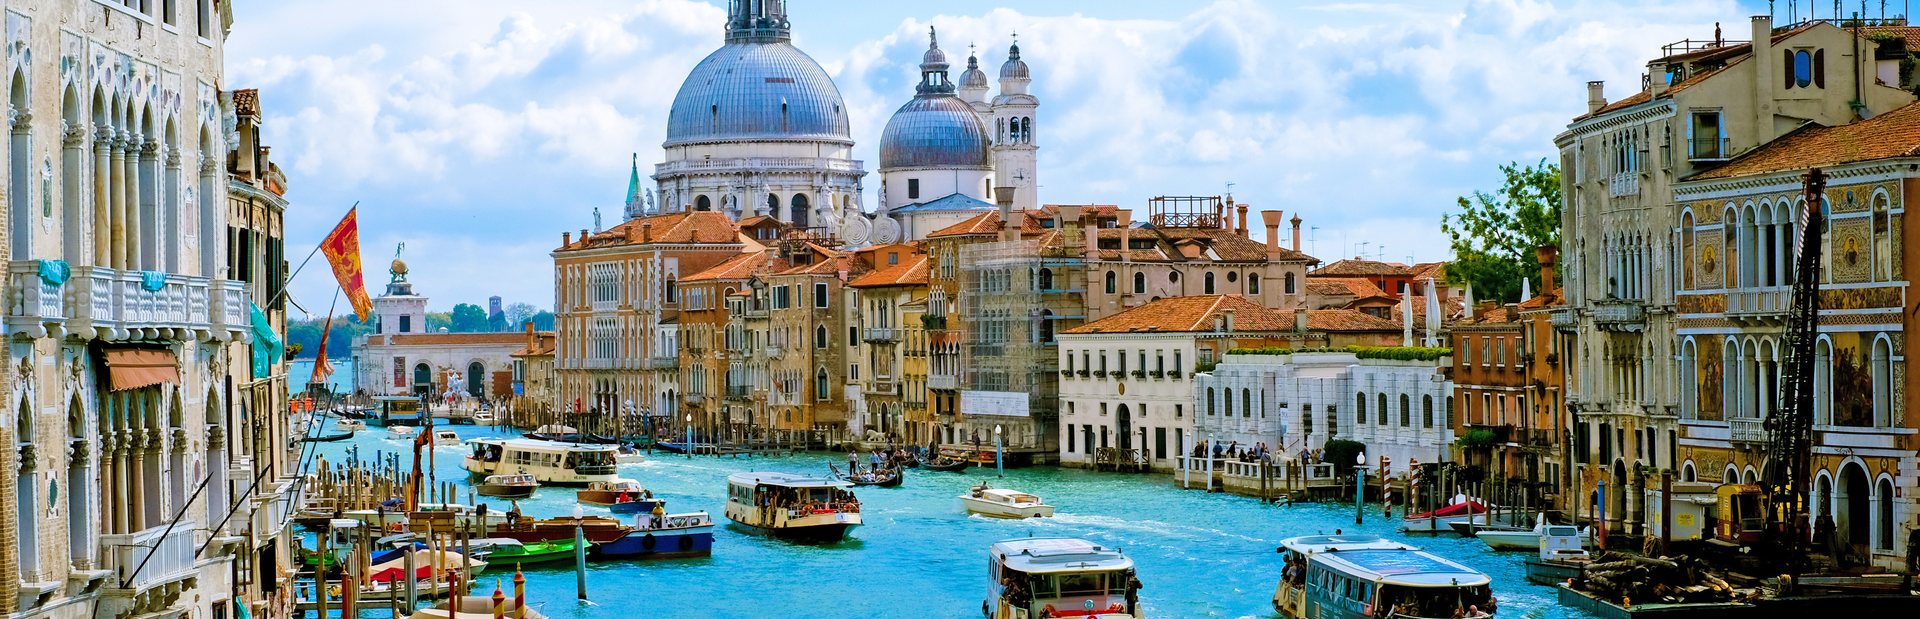 10 of the best things to do in Venice during the Venice Film Festival